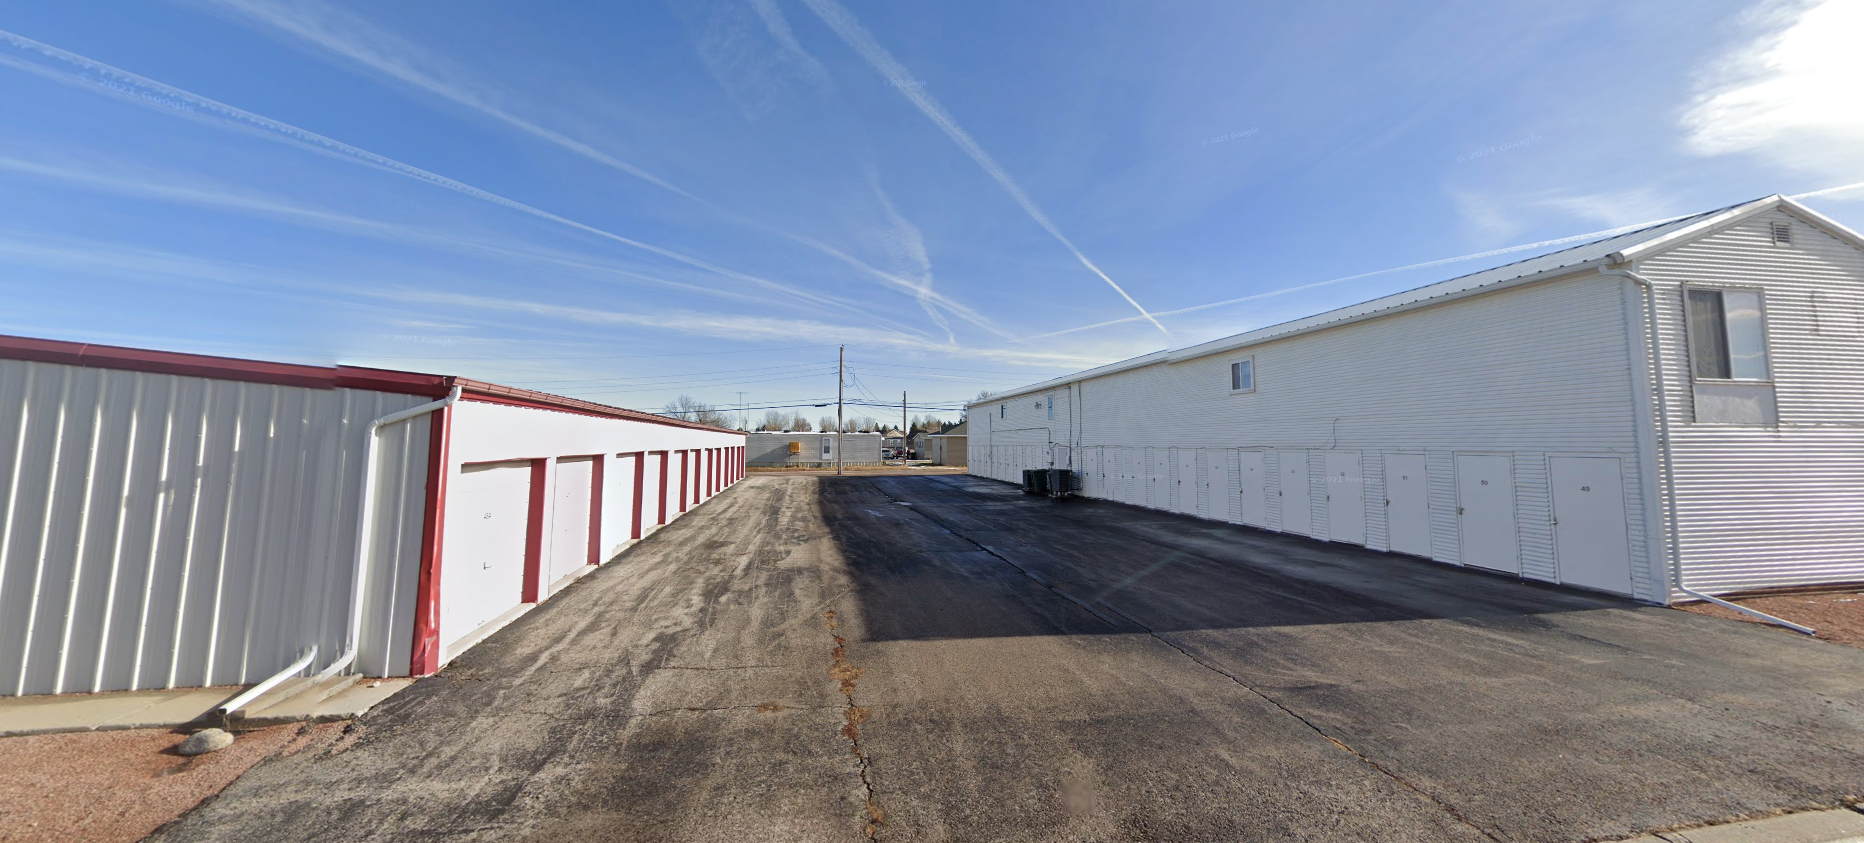 Secure and Affordable Storage with Drive-up Access in Gillette, WY